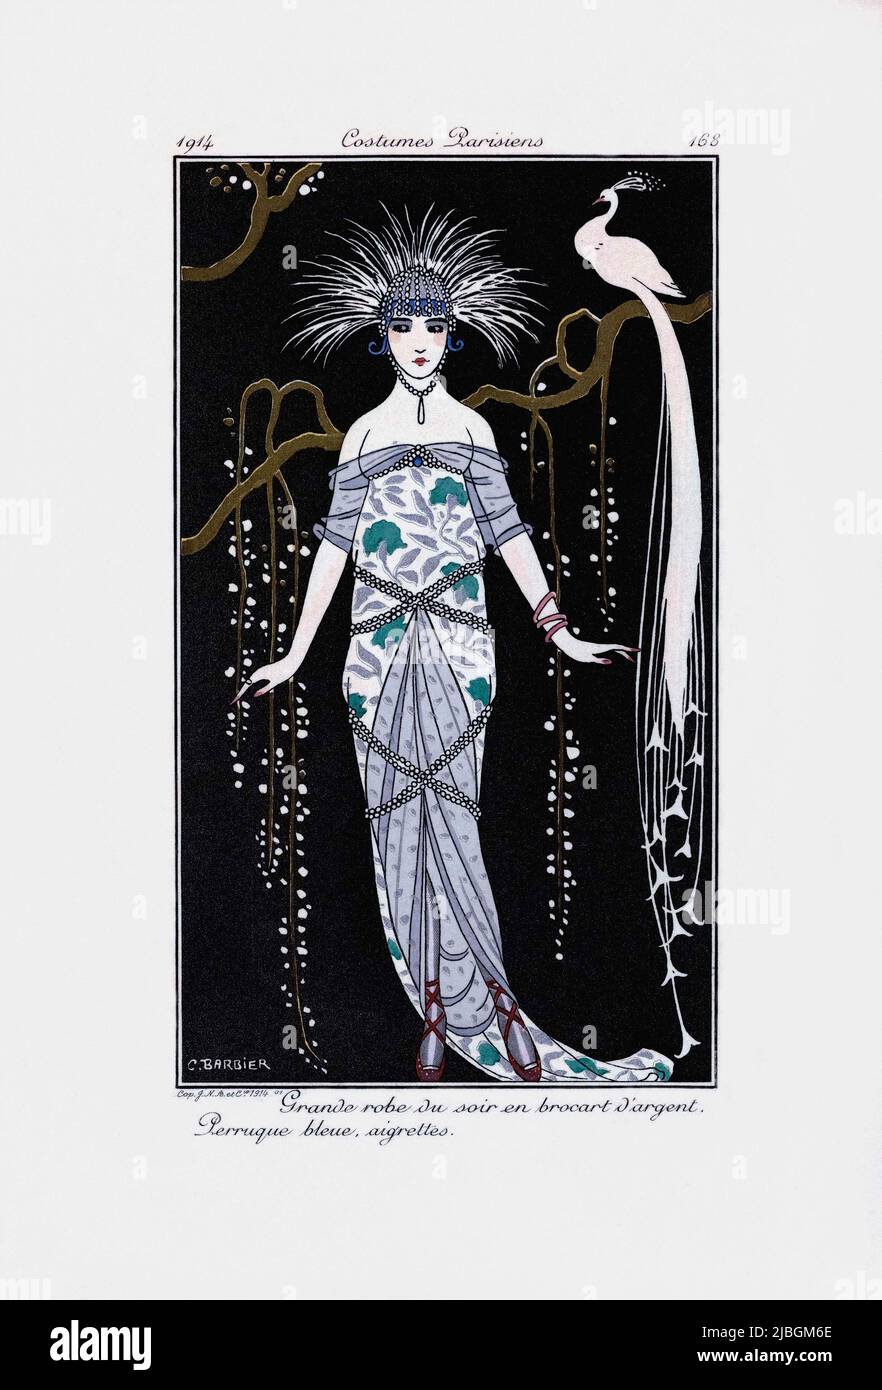 Grande robe du soir en brocart d'argent. Perruque bleue, aigrettes.  Grand evening dress in silver brocade. Blue wig, crests.   Print from the high fashion magazine Journal des Dames et des Modes, published from June 1, 1912 to August 1, 1914.  After a work by French illustrator George Barbier, 1882 - 1932. Stock Photo